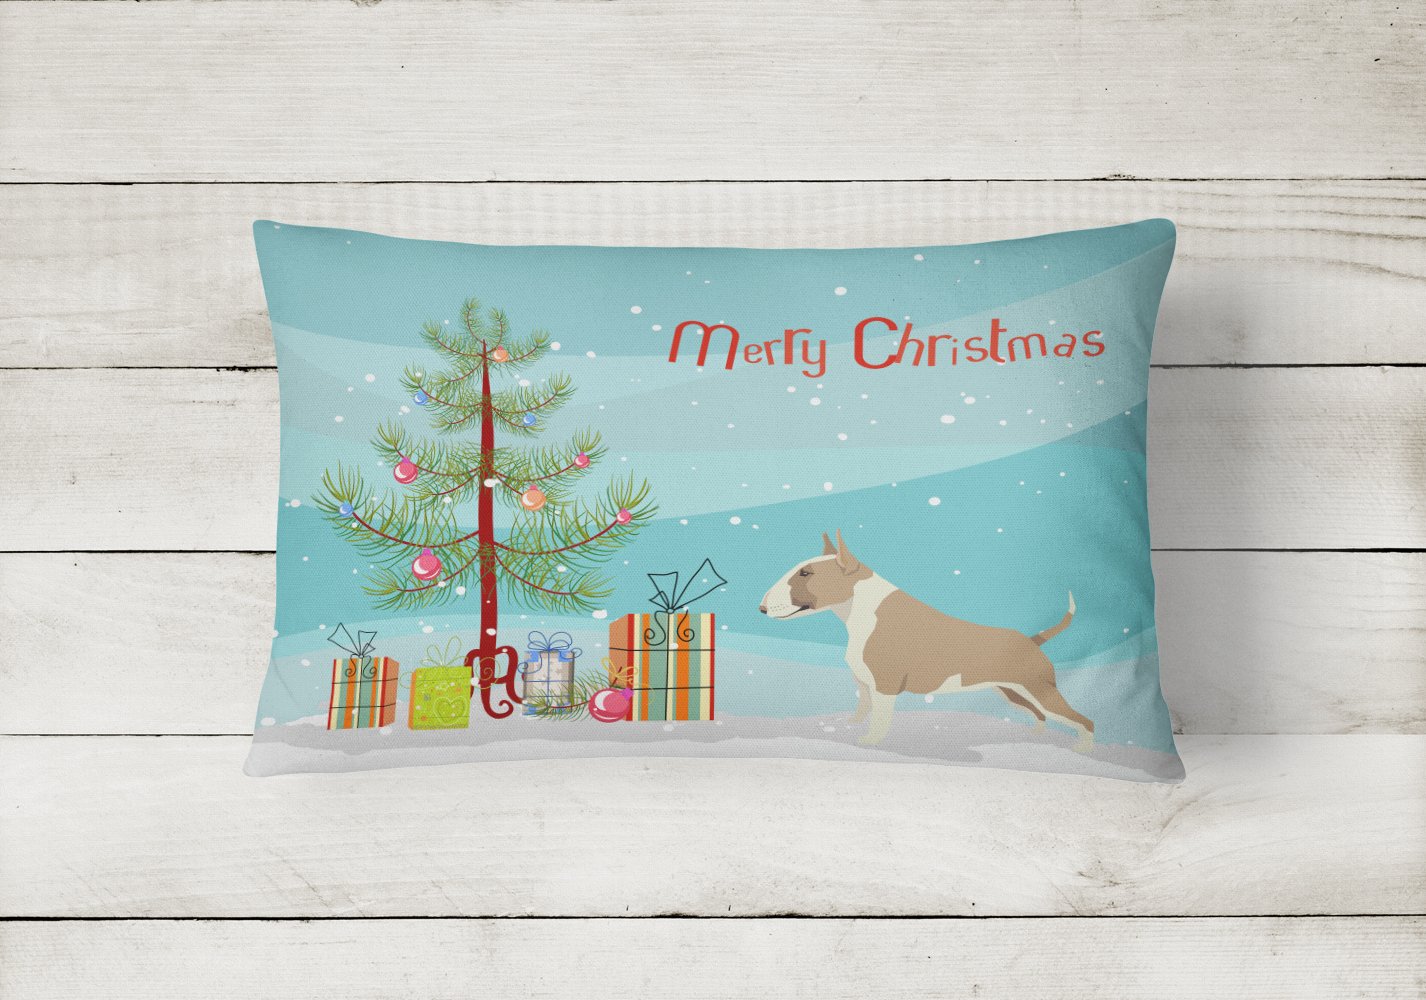 Fawn and White Bull Terrier Christmas Tree Canvas Fabric Decorative Pillow CK3528PW1216 by Caroline's Treasures